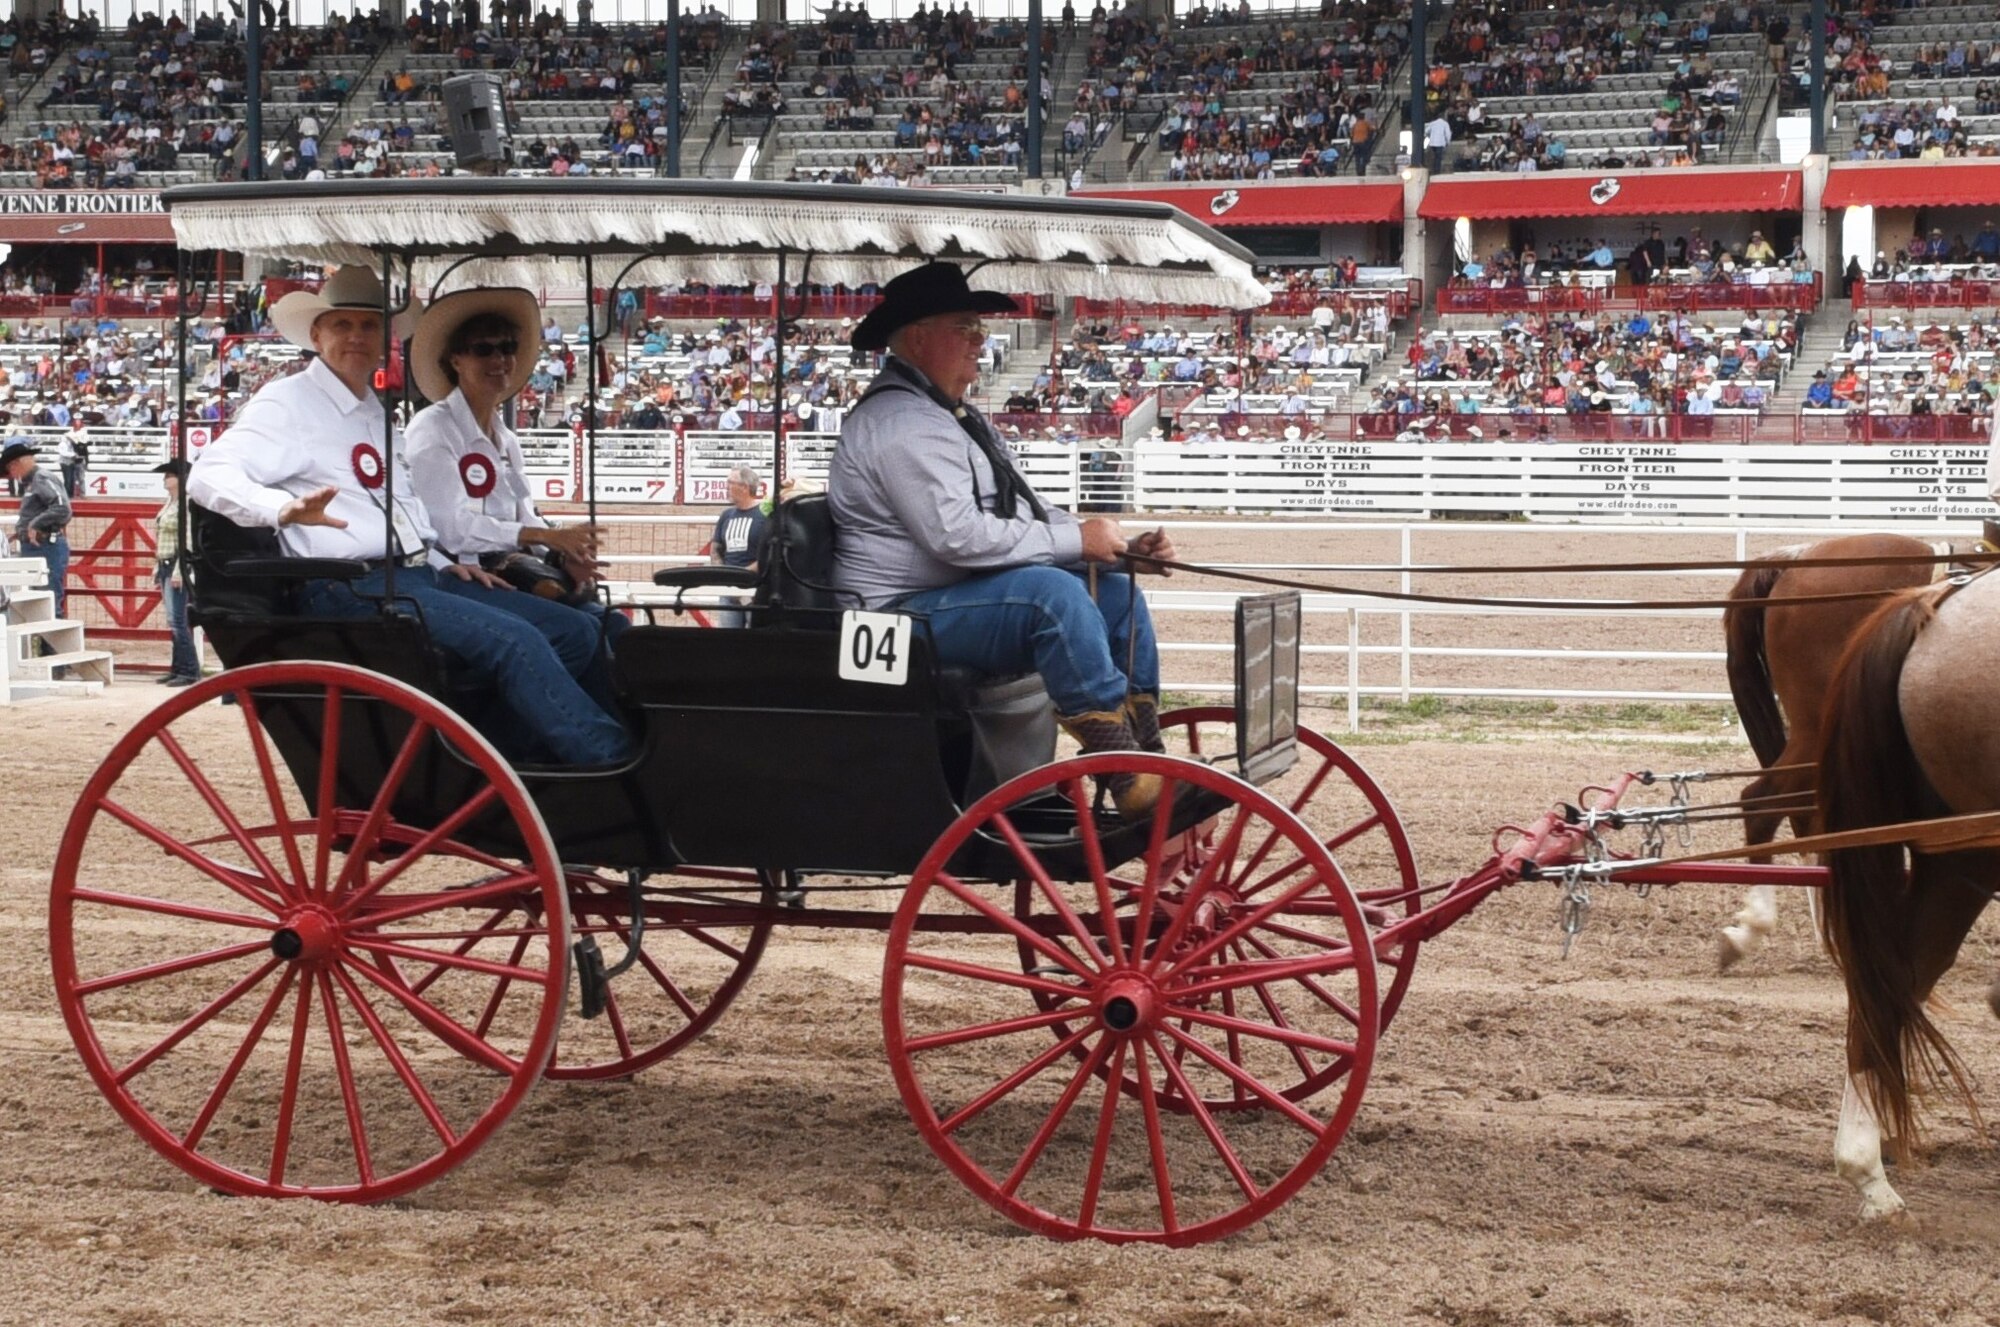 General Timothy Ray and his wife Rhonda ride onto the Cheyenne Frontier Days grounds as part of the Grand Entrance in Cheyenne, Wyo., July 20, 2019. The Grand Entrance marks the official start to rodeo at CFD. The F.E. Warren Air Force Base and Cheyenne communities came together to celebrate the CFD rodeo and festival, which runs from July 19-28. (U.S. Air Force photo by Senior Airman Breanna Carter.)